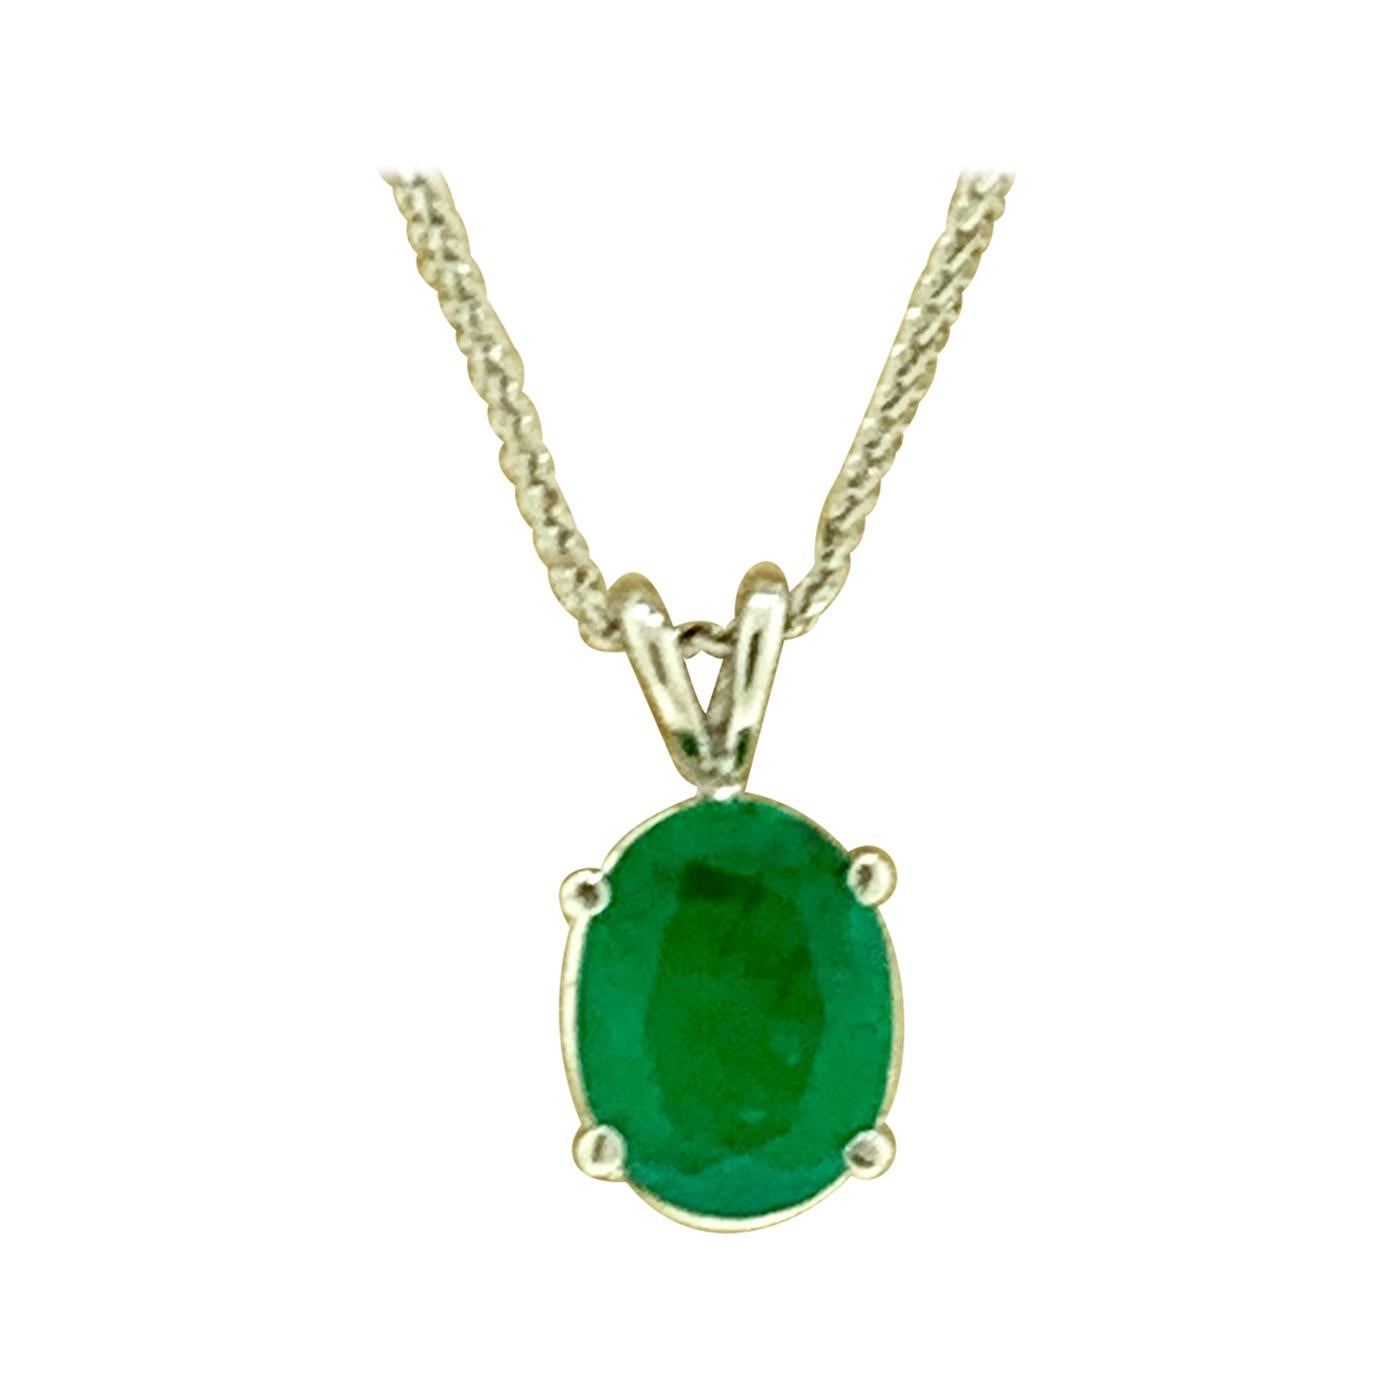 2.5 Carat Oval Shape Emerald Pendant or Necklace 14 Karat White Gold with Chain 4